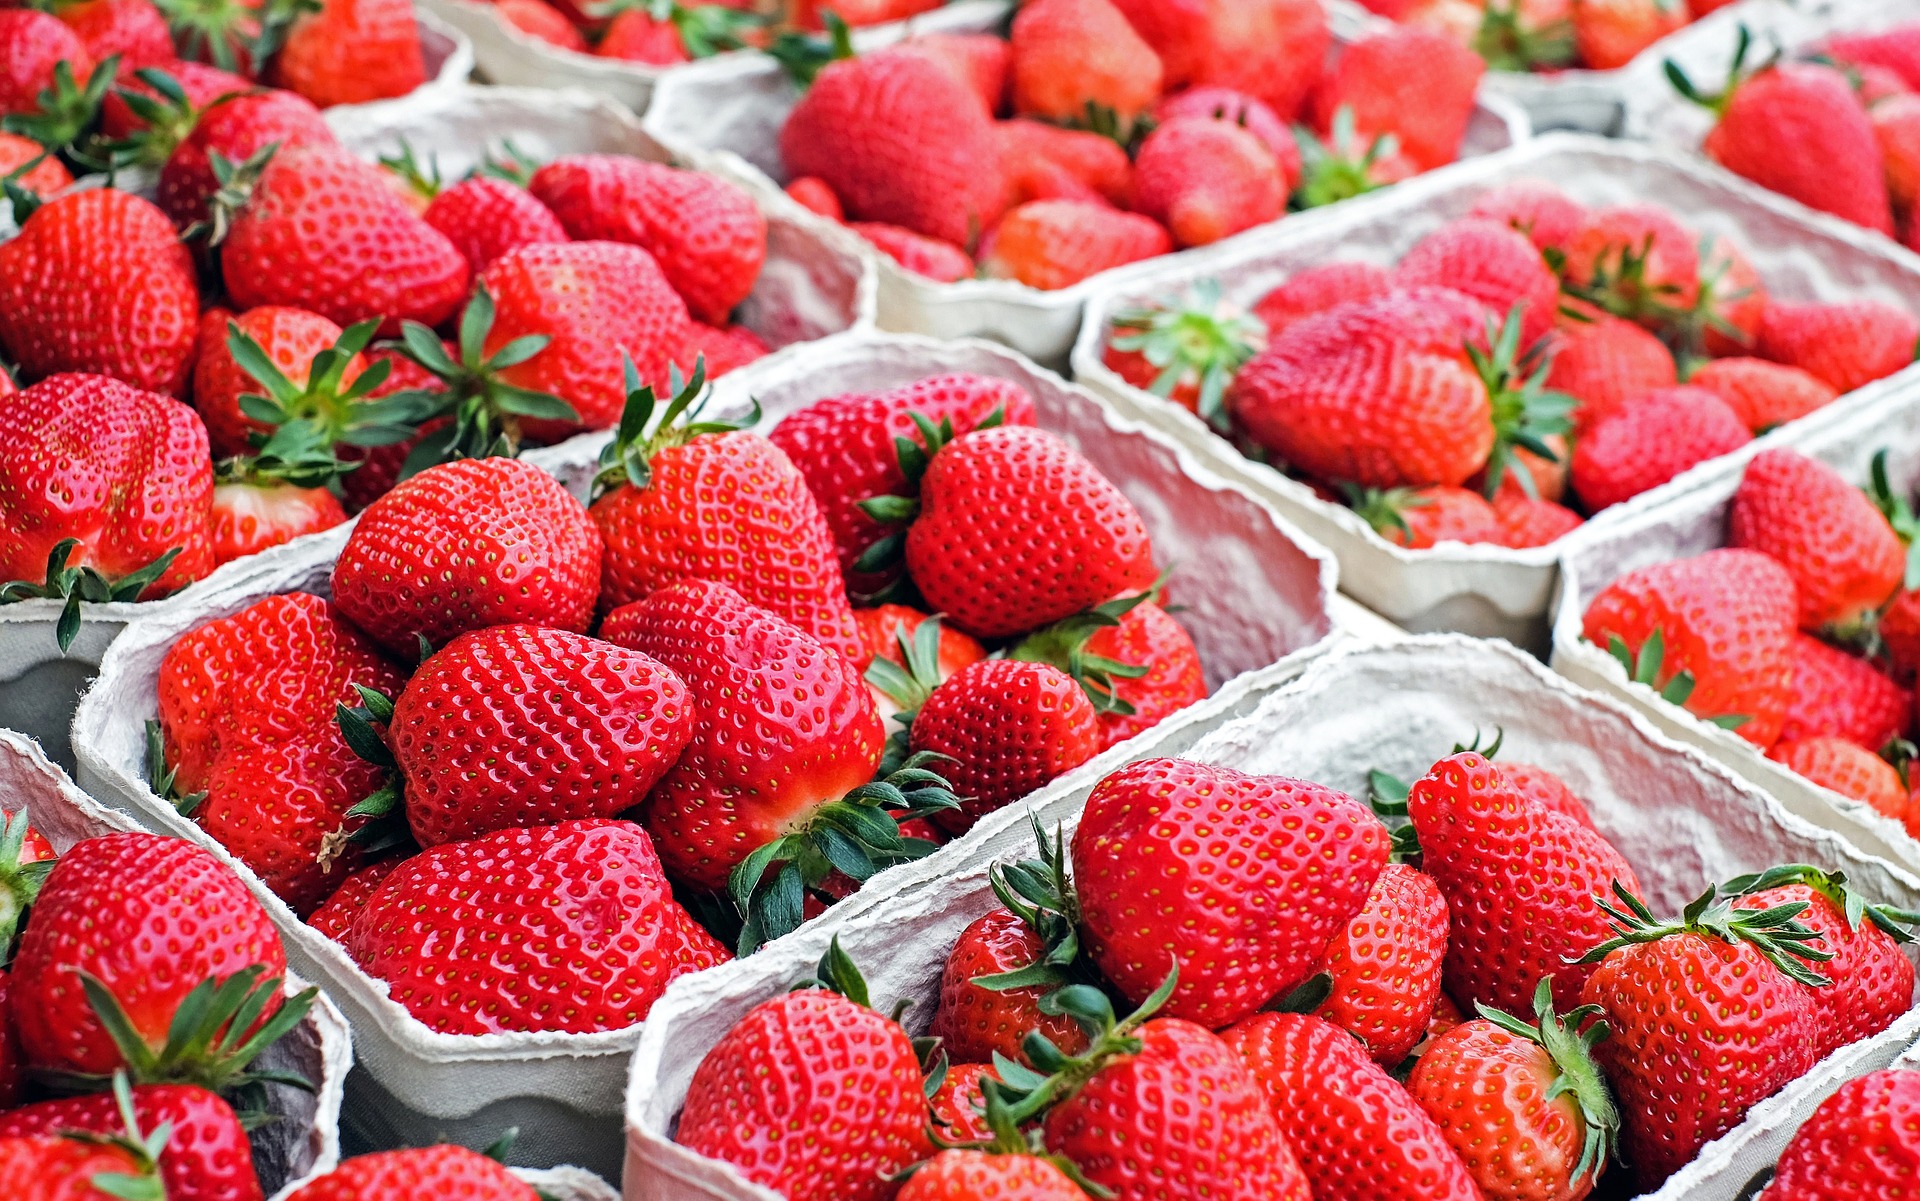 UK Strawberry Season is finally in full swing with a glut of strawberries expected.